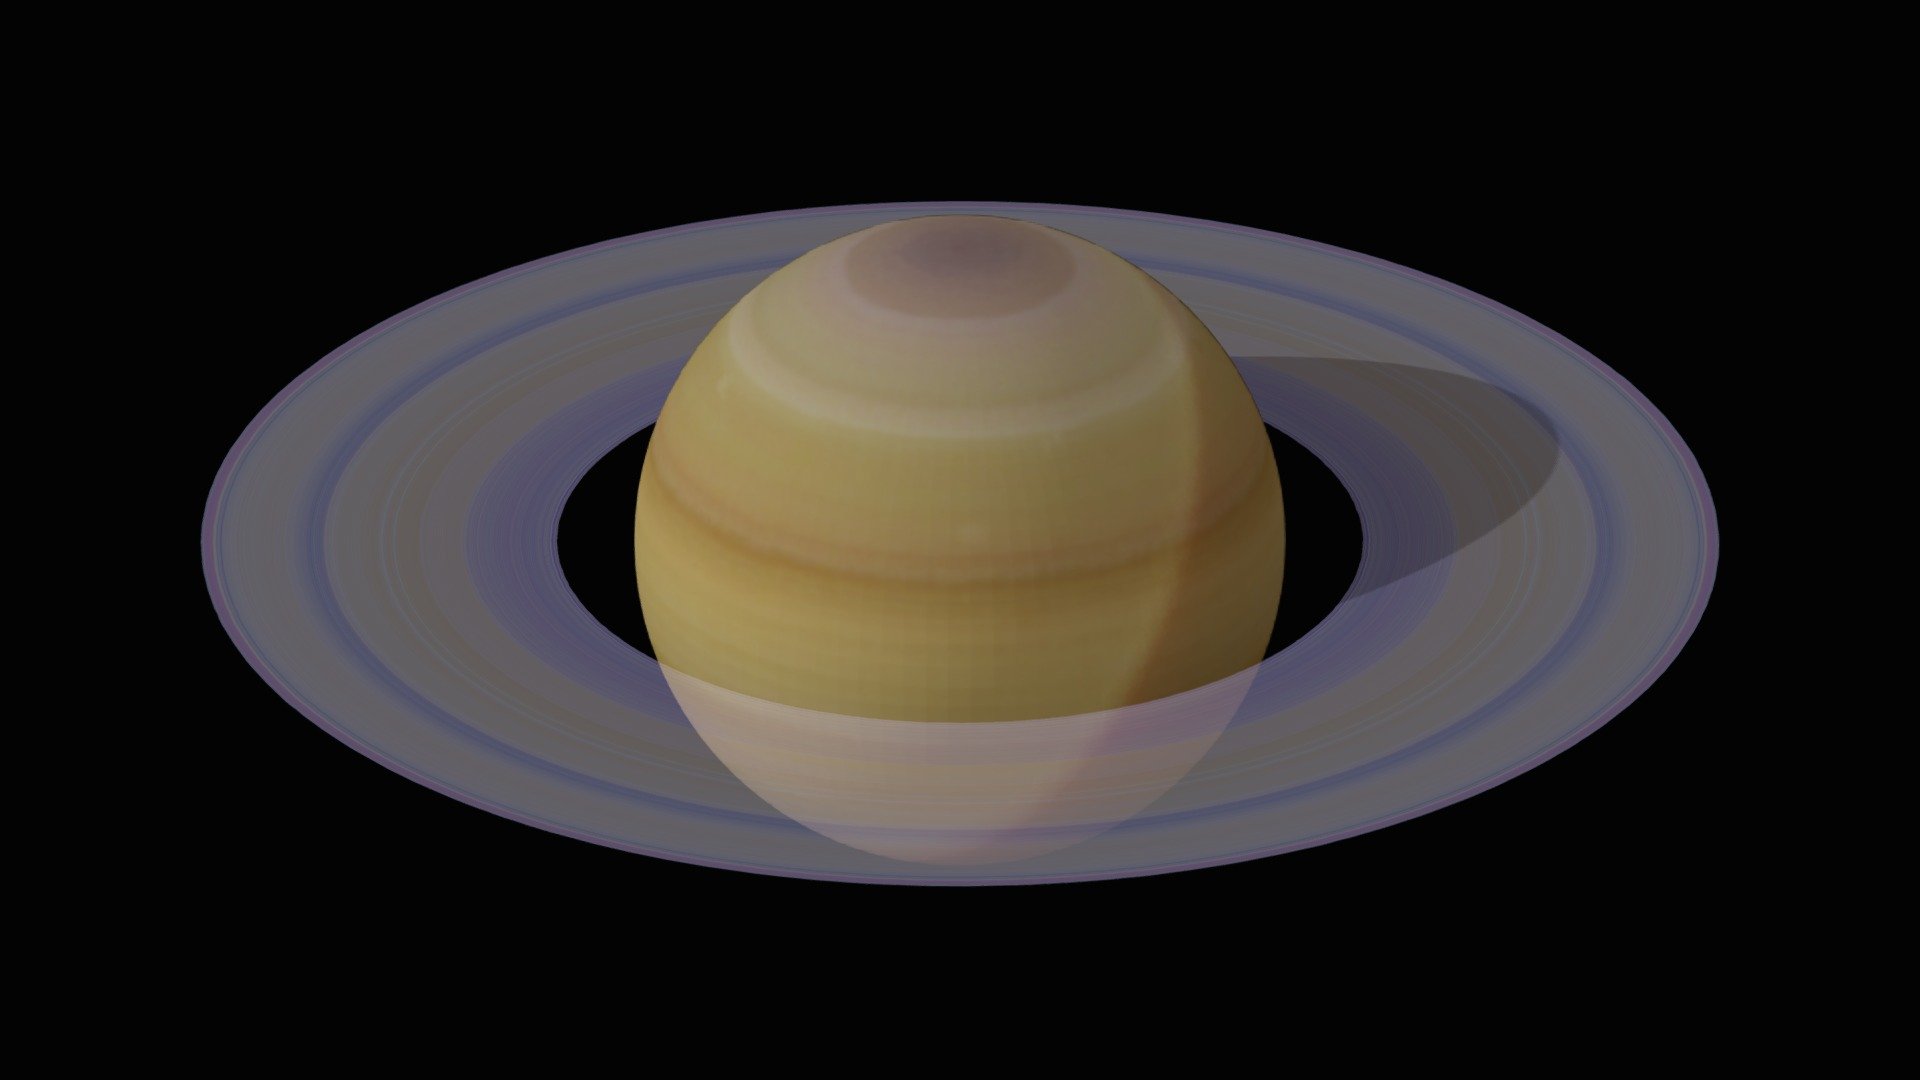 Planet Saturn with rings